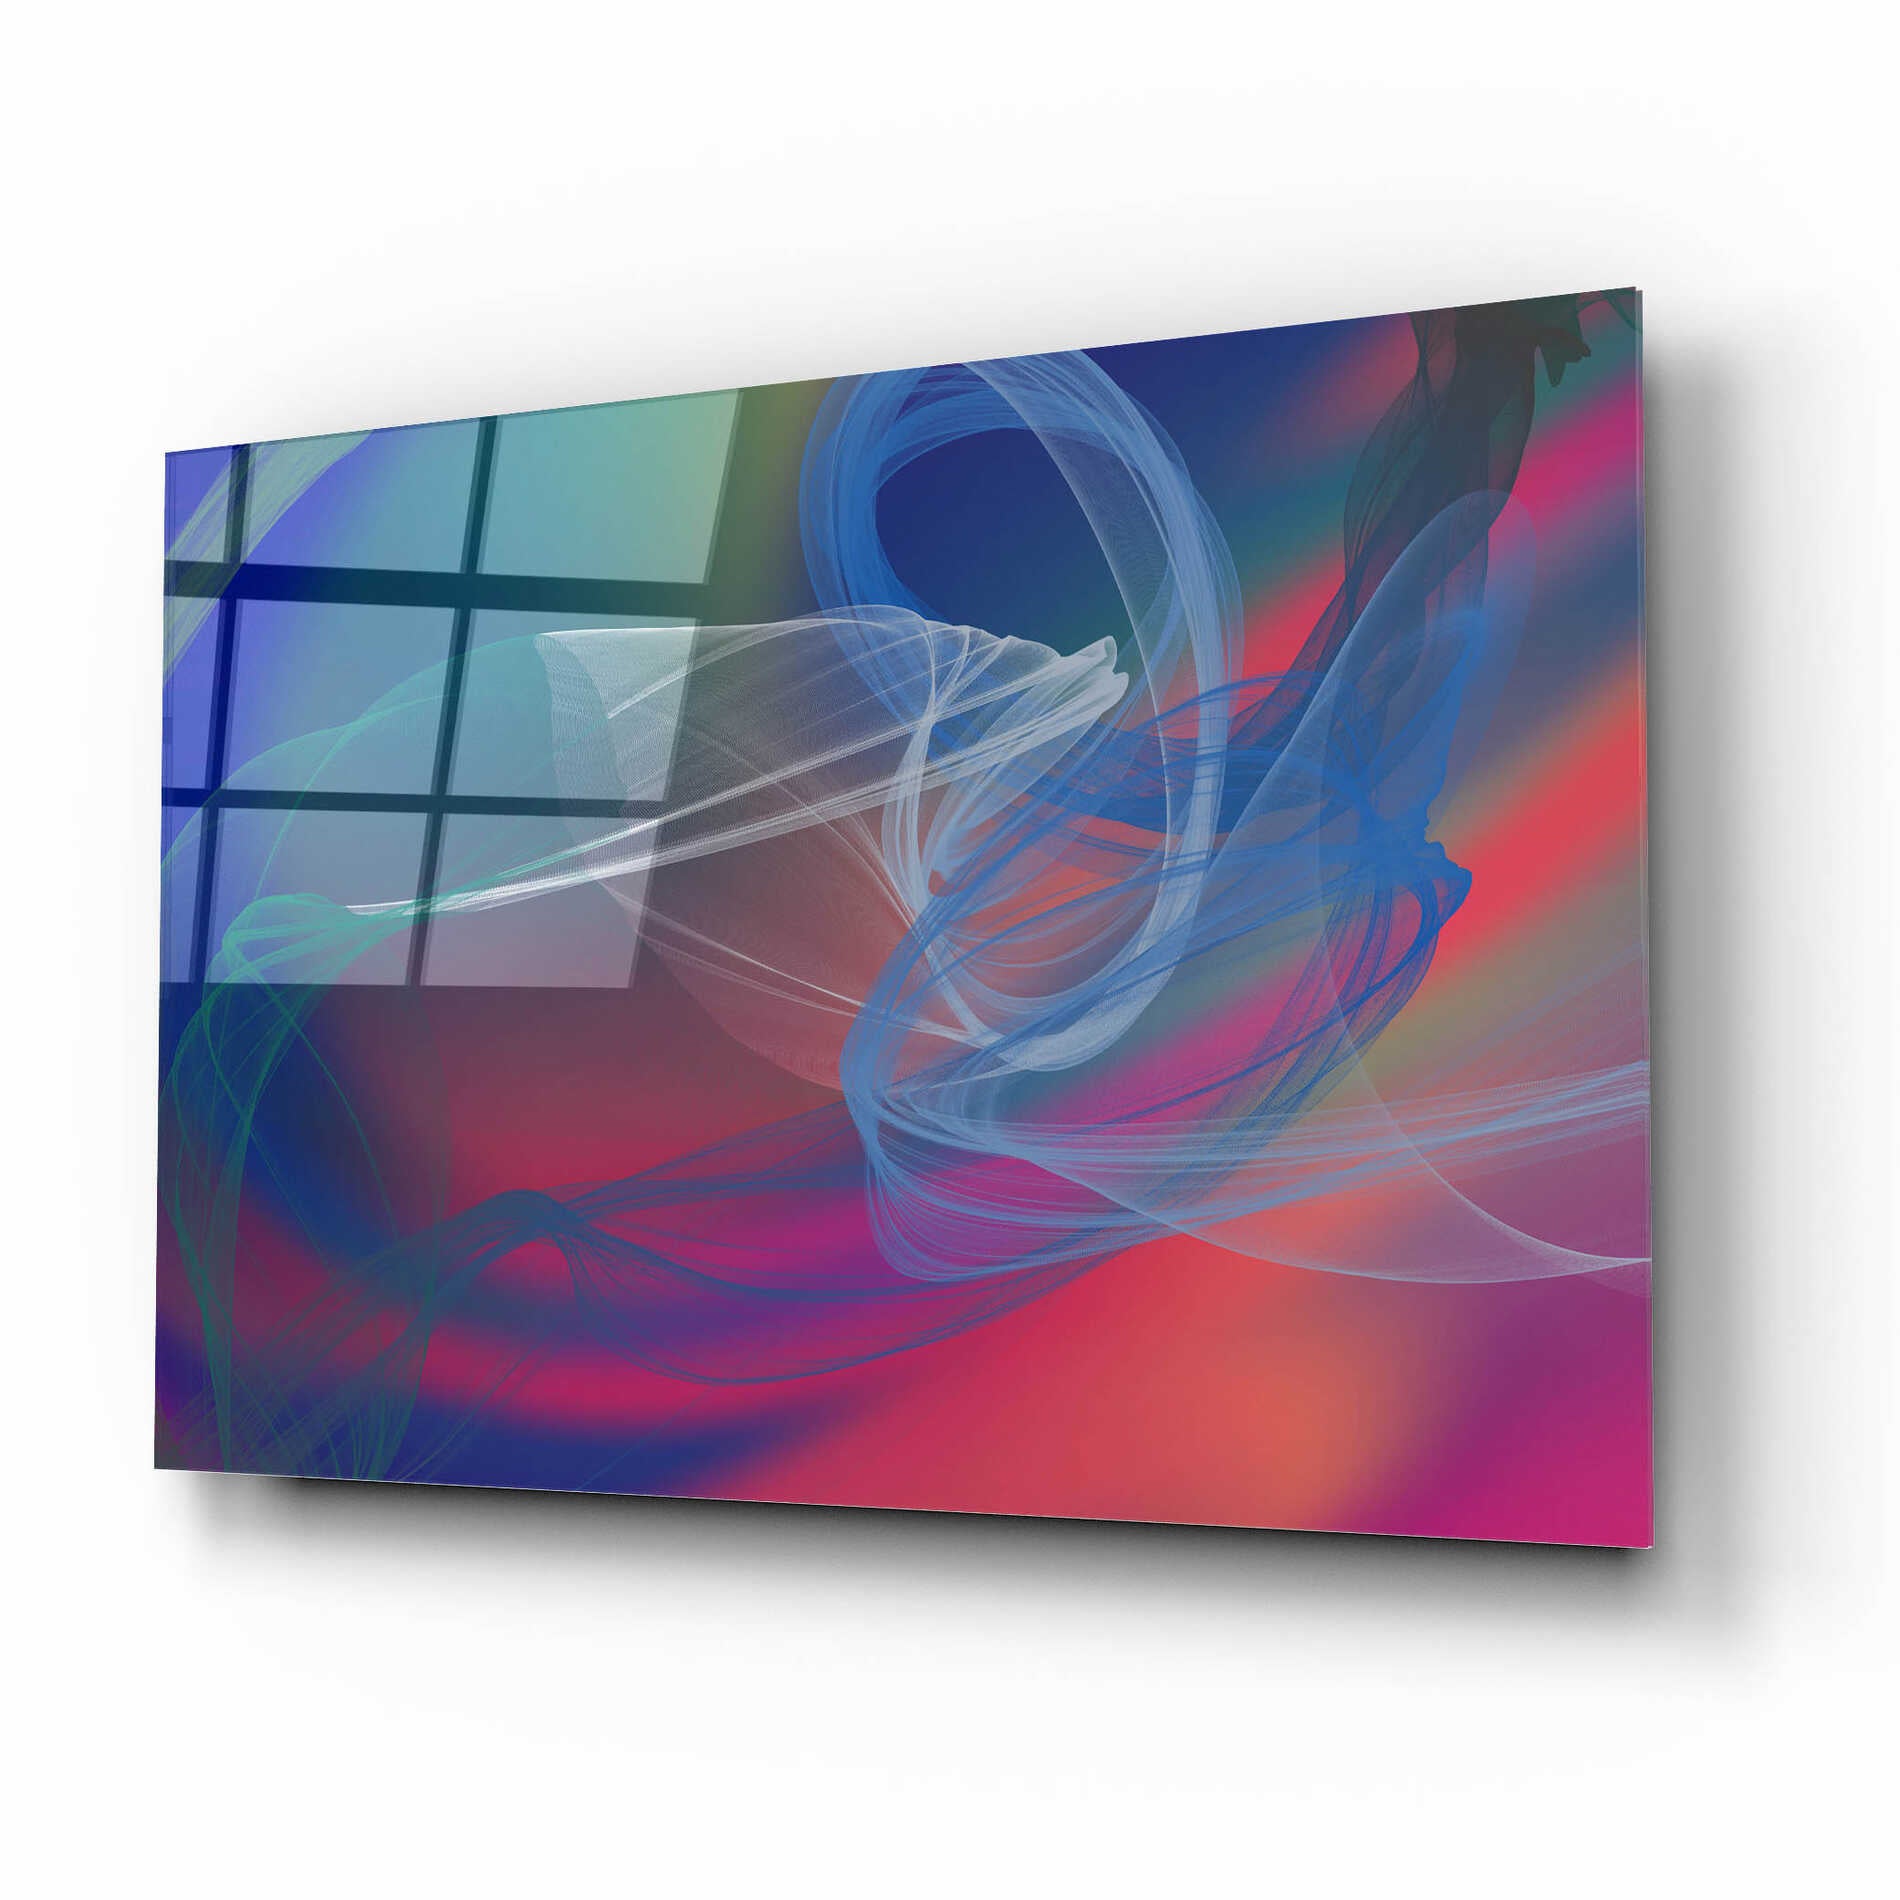 Epic Art 'Inverted Color In The Lines 4' by Irena Orlov Acrylic Glass Wall Art,16x12